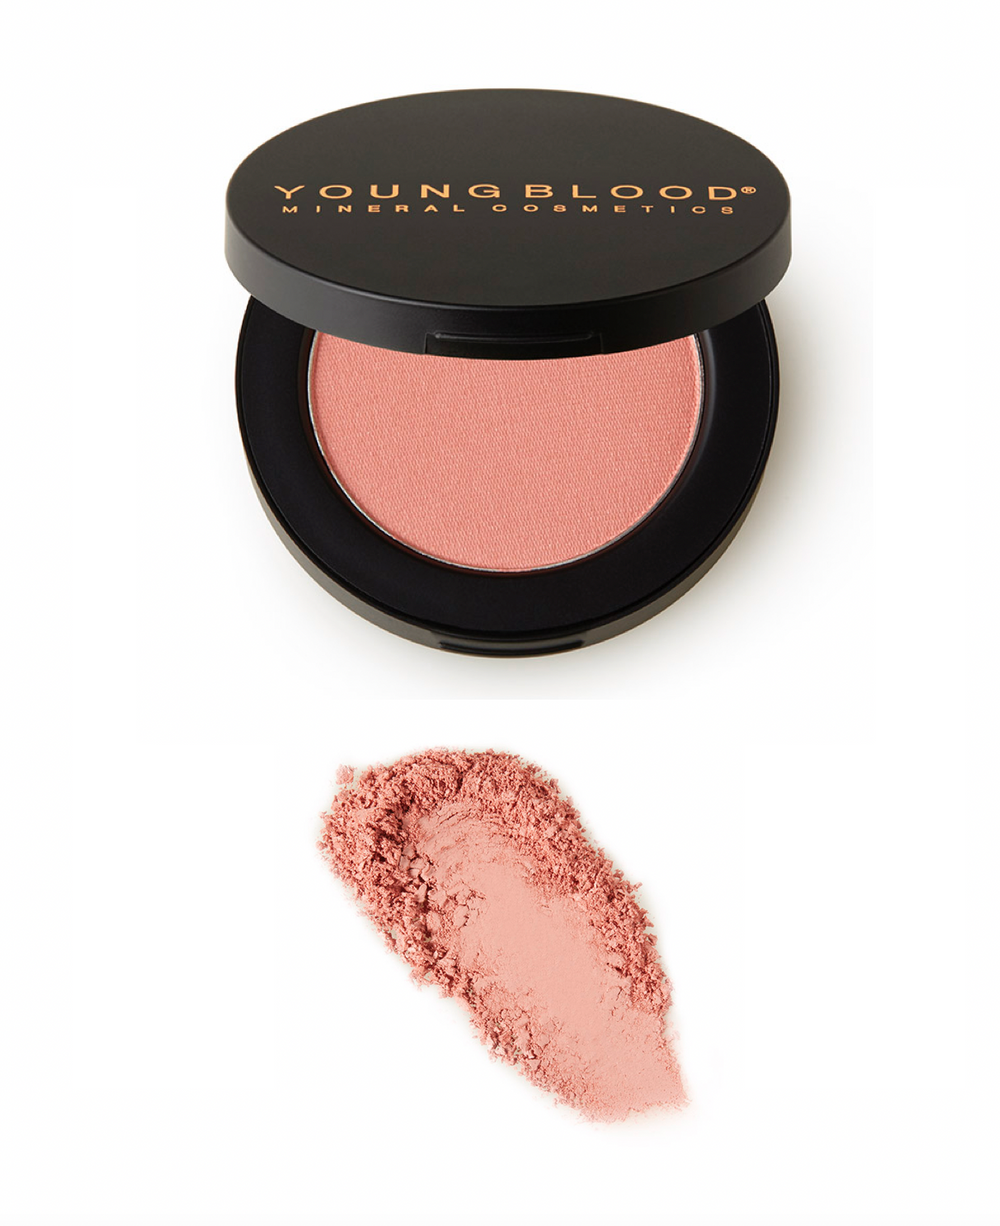 YOUNGBLOOD mineral pressed blush, 3 g.